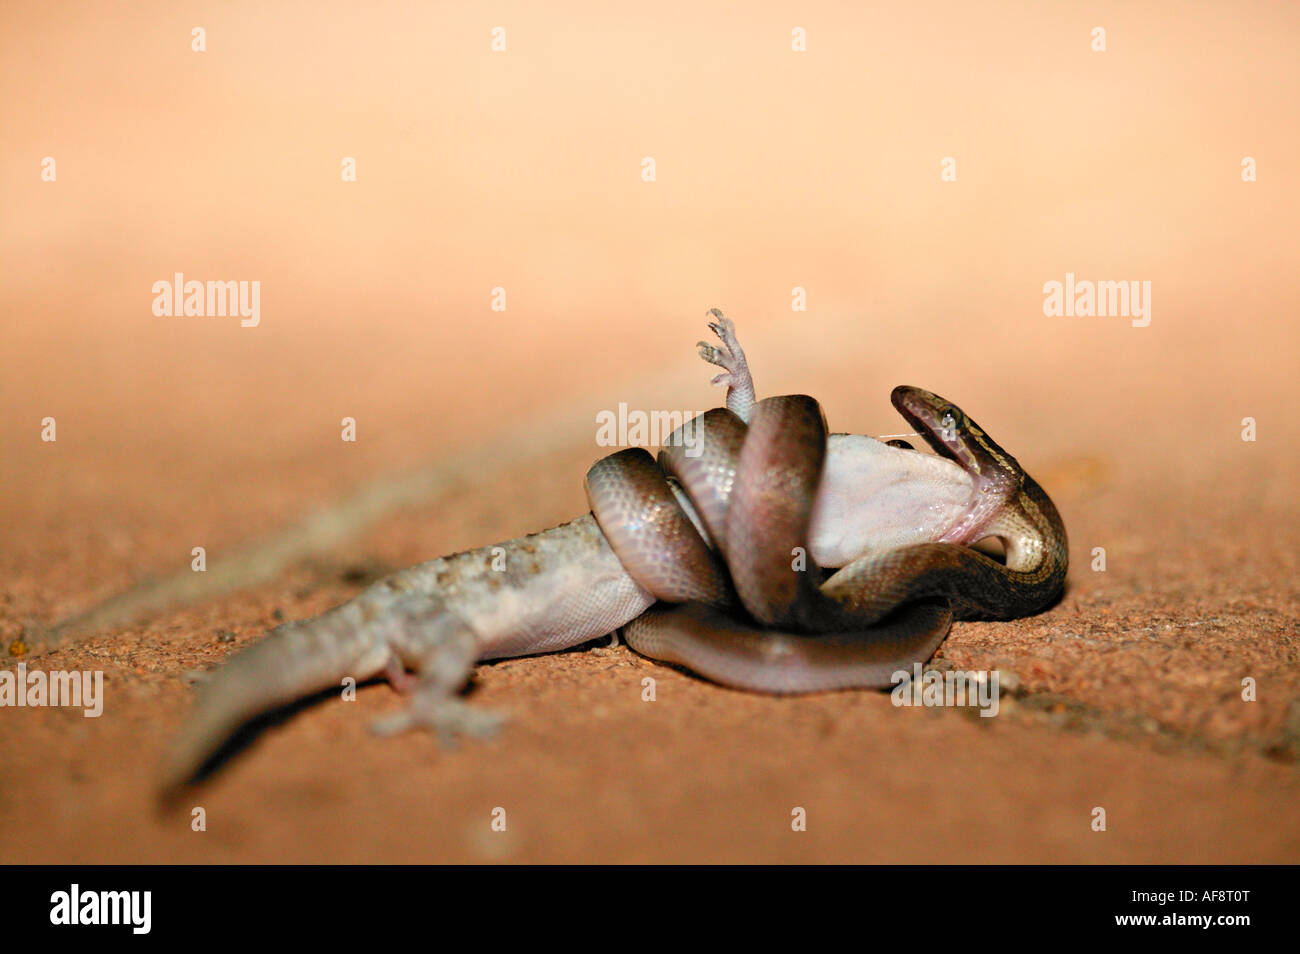 Brown house snake constricting a gecko and starting to swallow the gecko Sabi Sand Game Reserve, Mpumalanga; South Africa Stock Photo